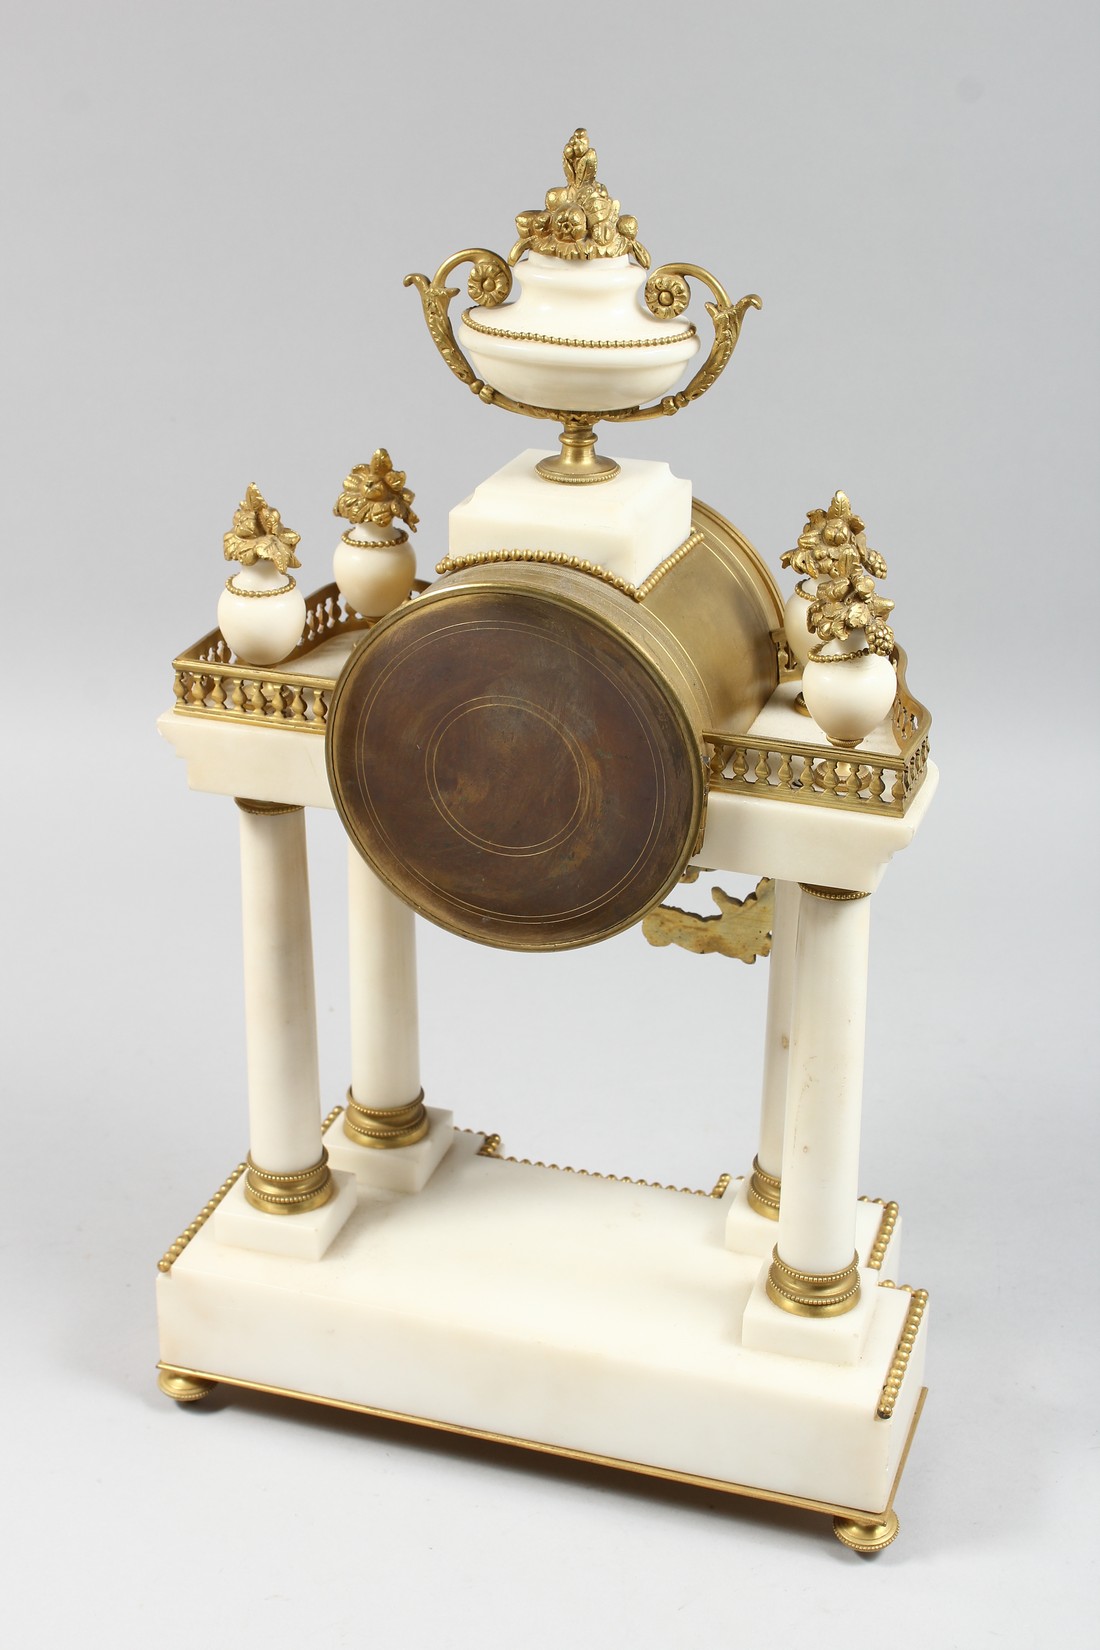 A GOOD 19TH CENTURY FRENCH WHITE MARBLE AND ORMOLU PORTICO MANTLE CLOCK with a brass drum shape - Image 3 of 4